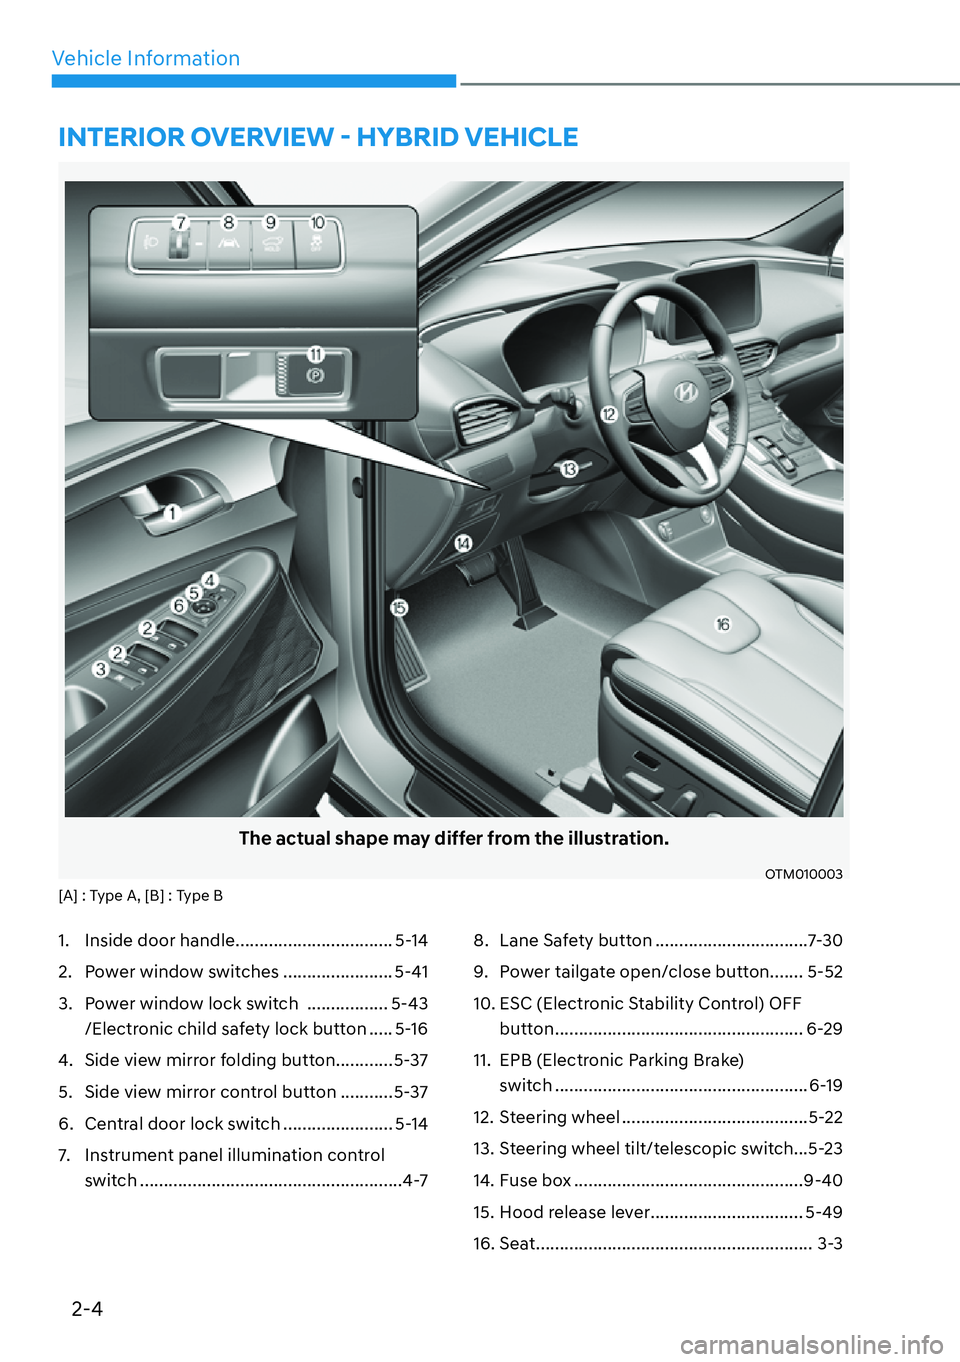 HYUNDAI SANTA FE HYBRID 2022  Owners Manual 2-4
Vehicle Information
The actual shape may differ from the illustration.
OTM010003
[A] : Type A, [B] : Type B 
1.  Inside door handle ................................. 5-14 
2.  Power window switche